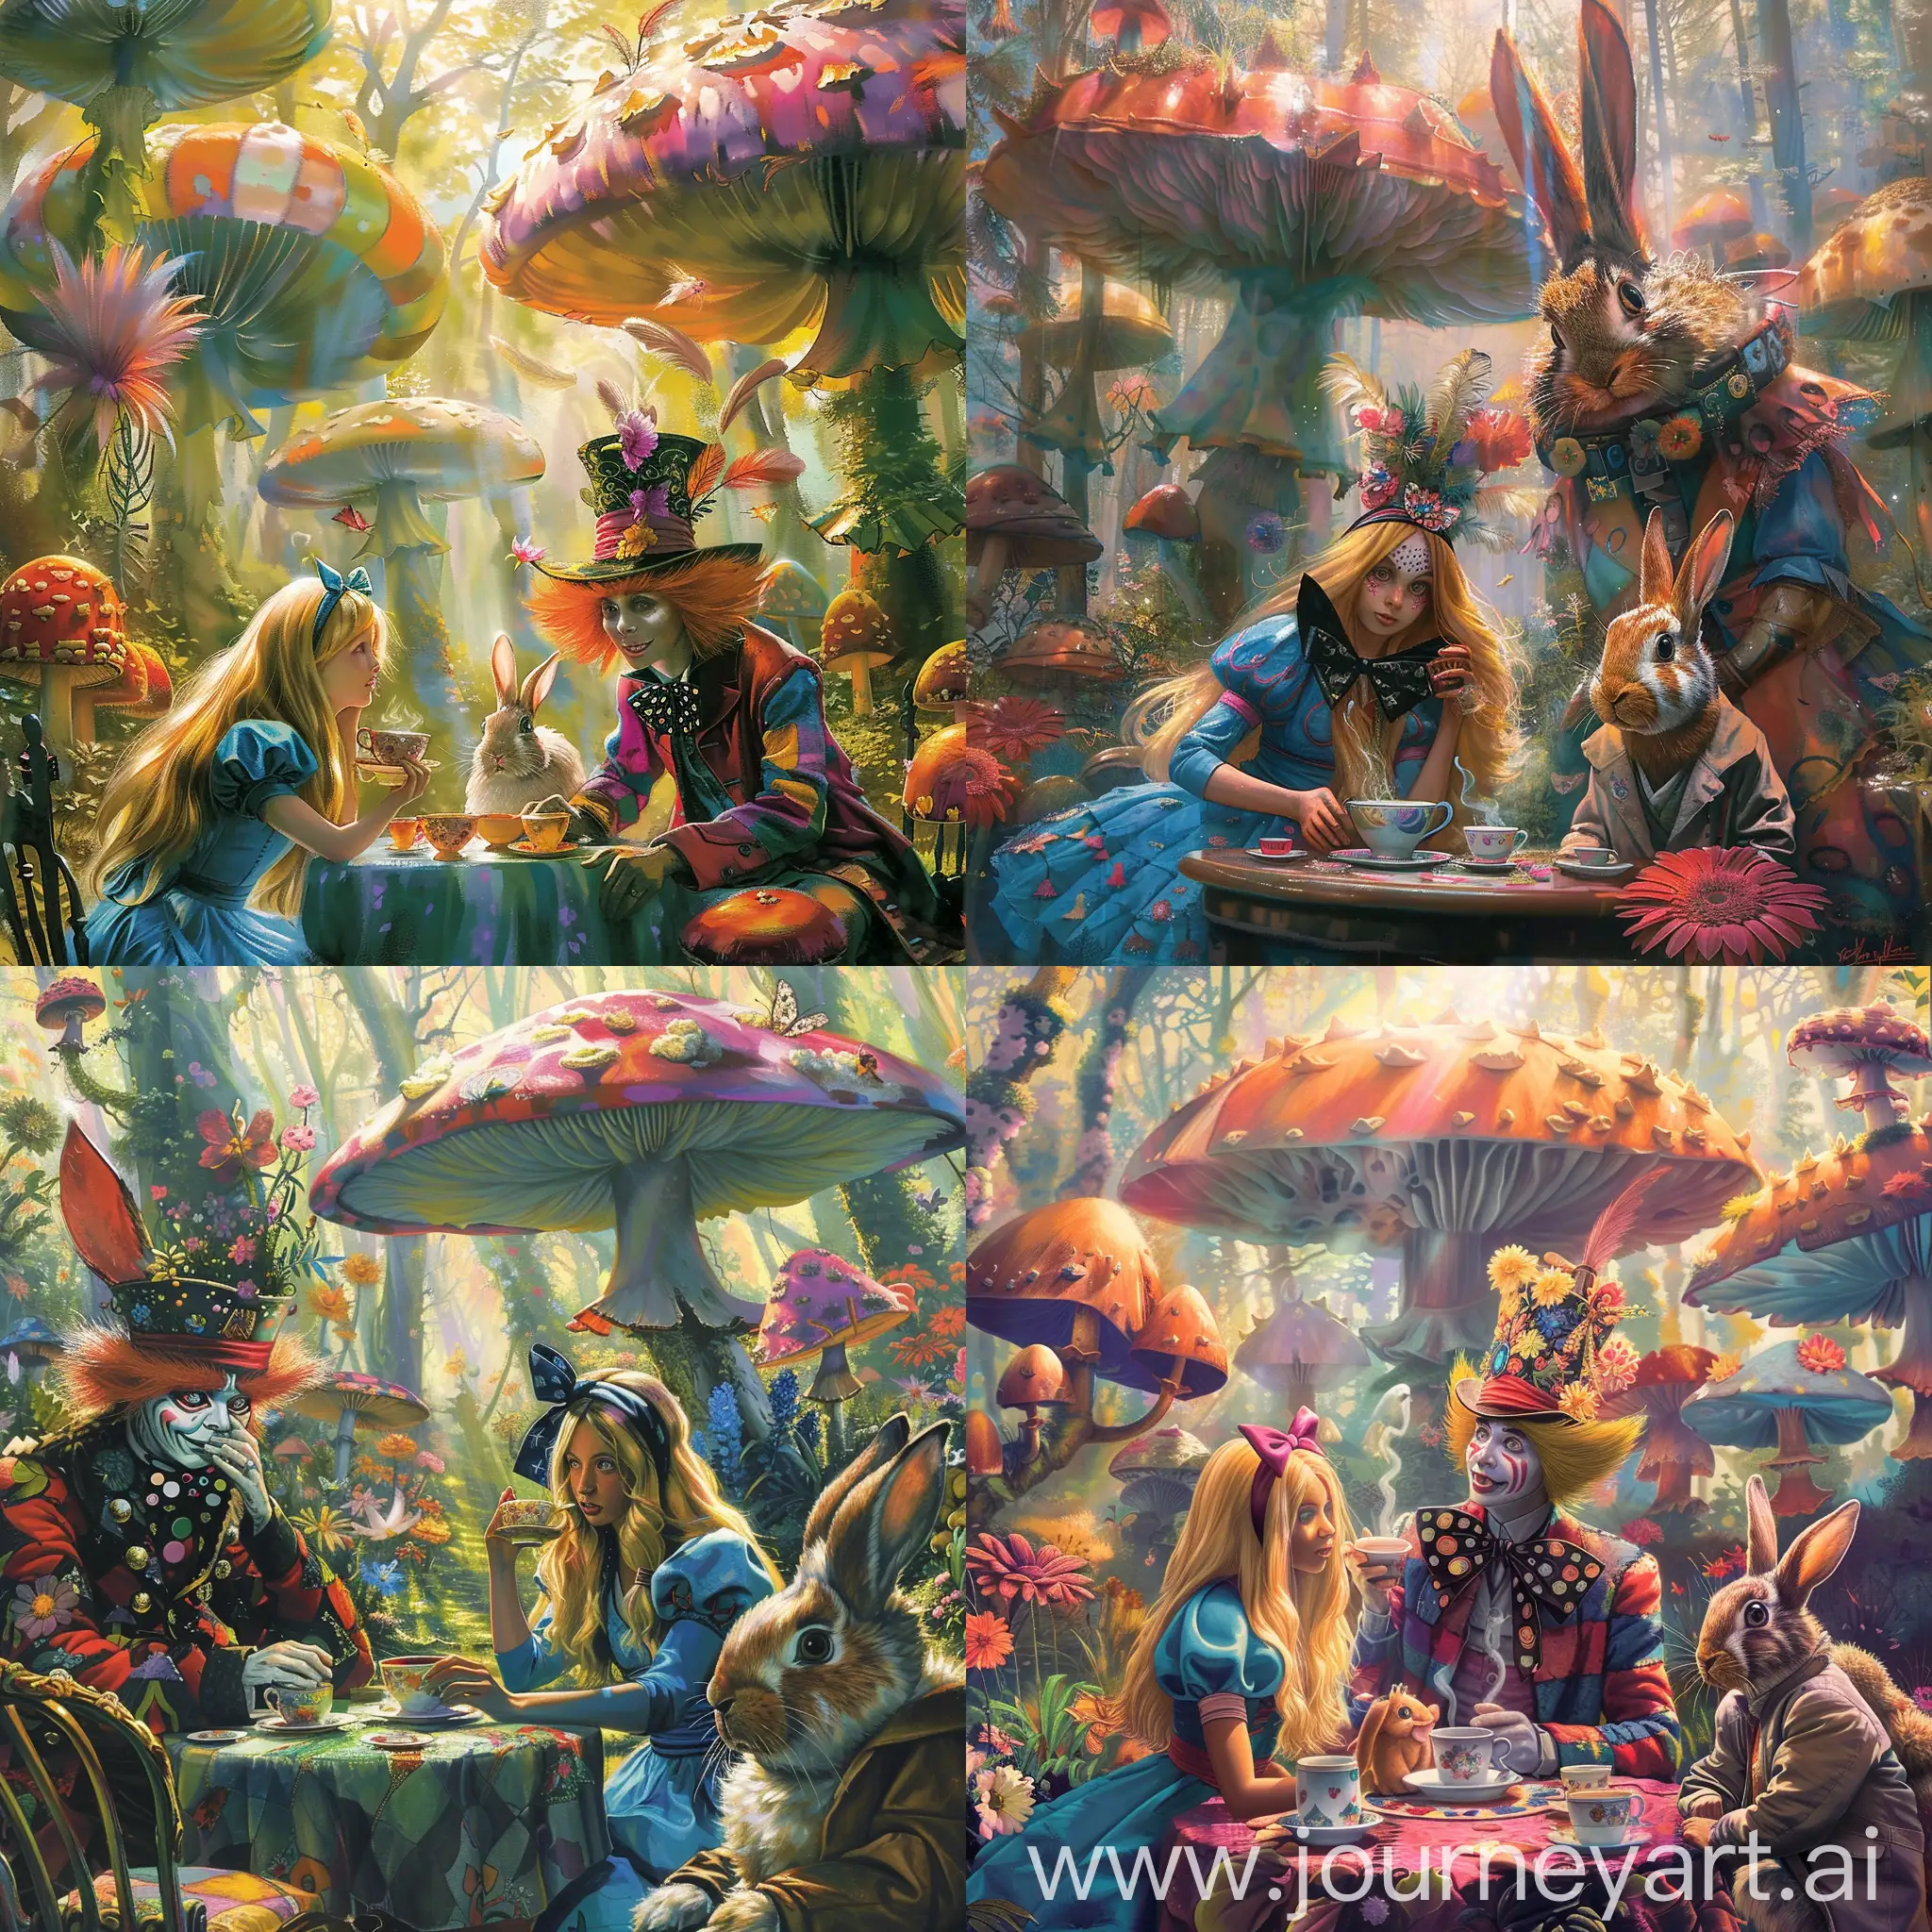 Alice drinking tea with the Mad Hatter and the March Hare in a psychedelic forest full of giant mushrooms and talking flowers, bright colors, fantasy style, sun shining, cheerful mood, high quality, high detail, Alice girl with blond hair in a blue dress. She has long hair and a bow on her head. A hatter is a man in a multi-colored suit and bright hair, on his head is a large hat with flowers and feathers. March hare in a jacket. He looks stupid. They all sit at the table and drink tea.